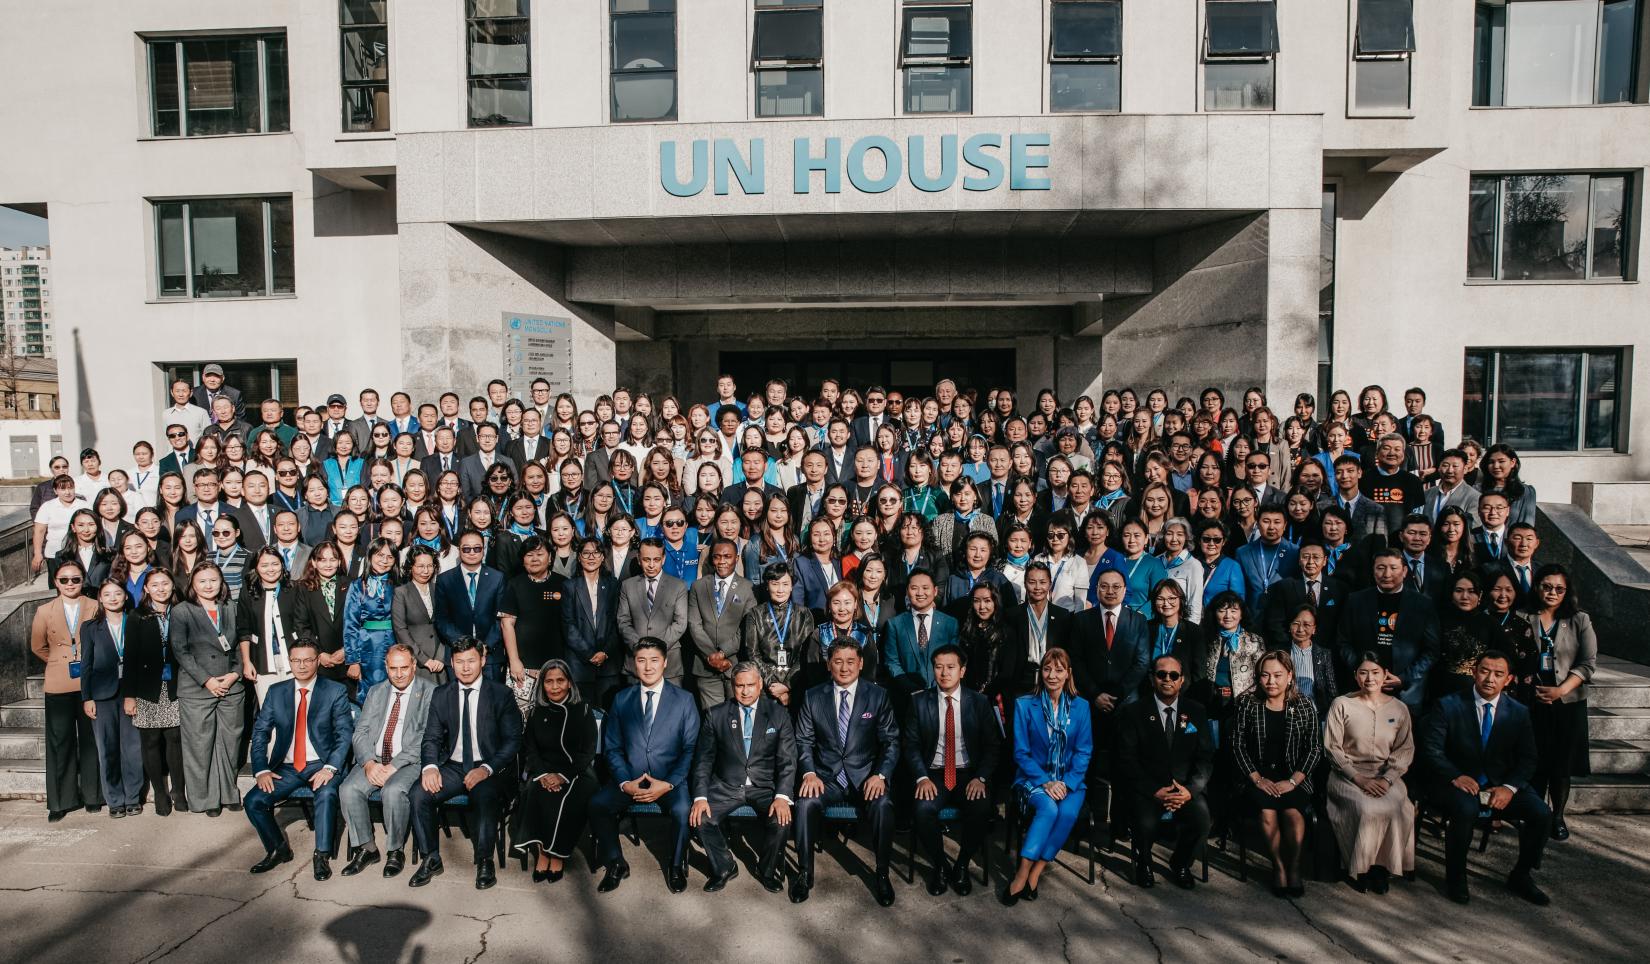 President with all UN staff